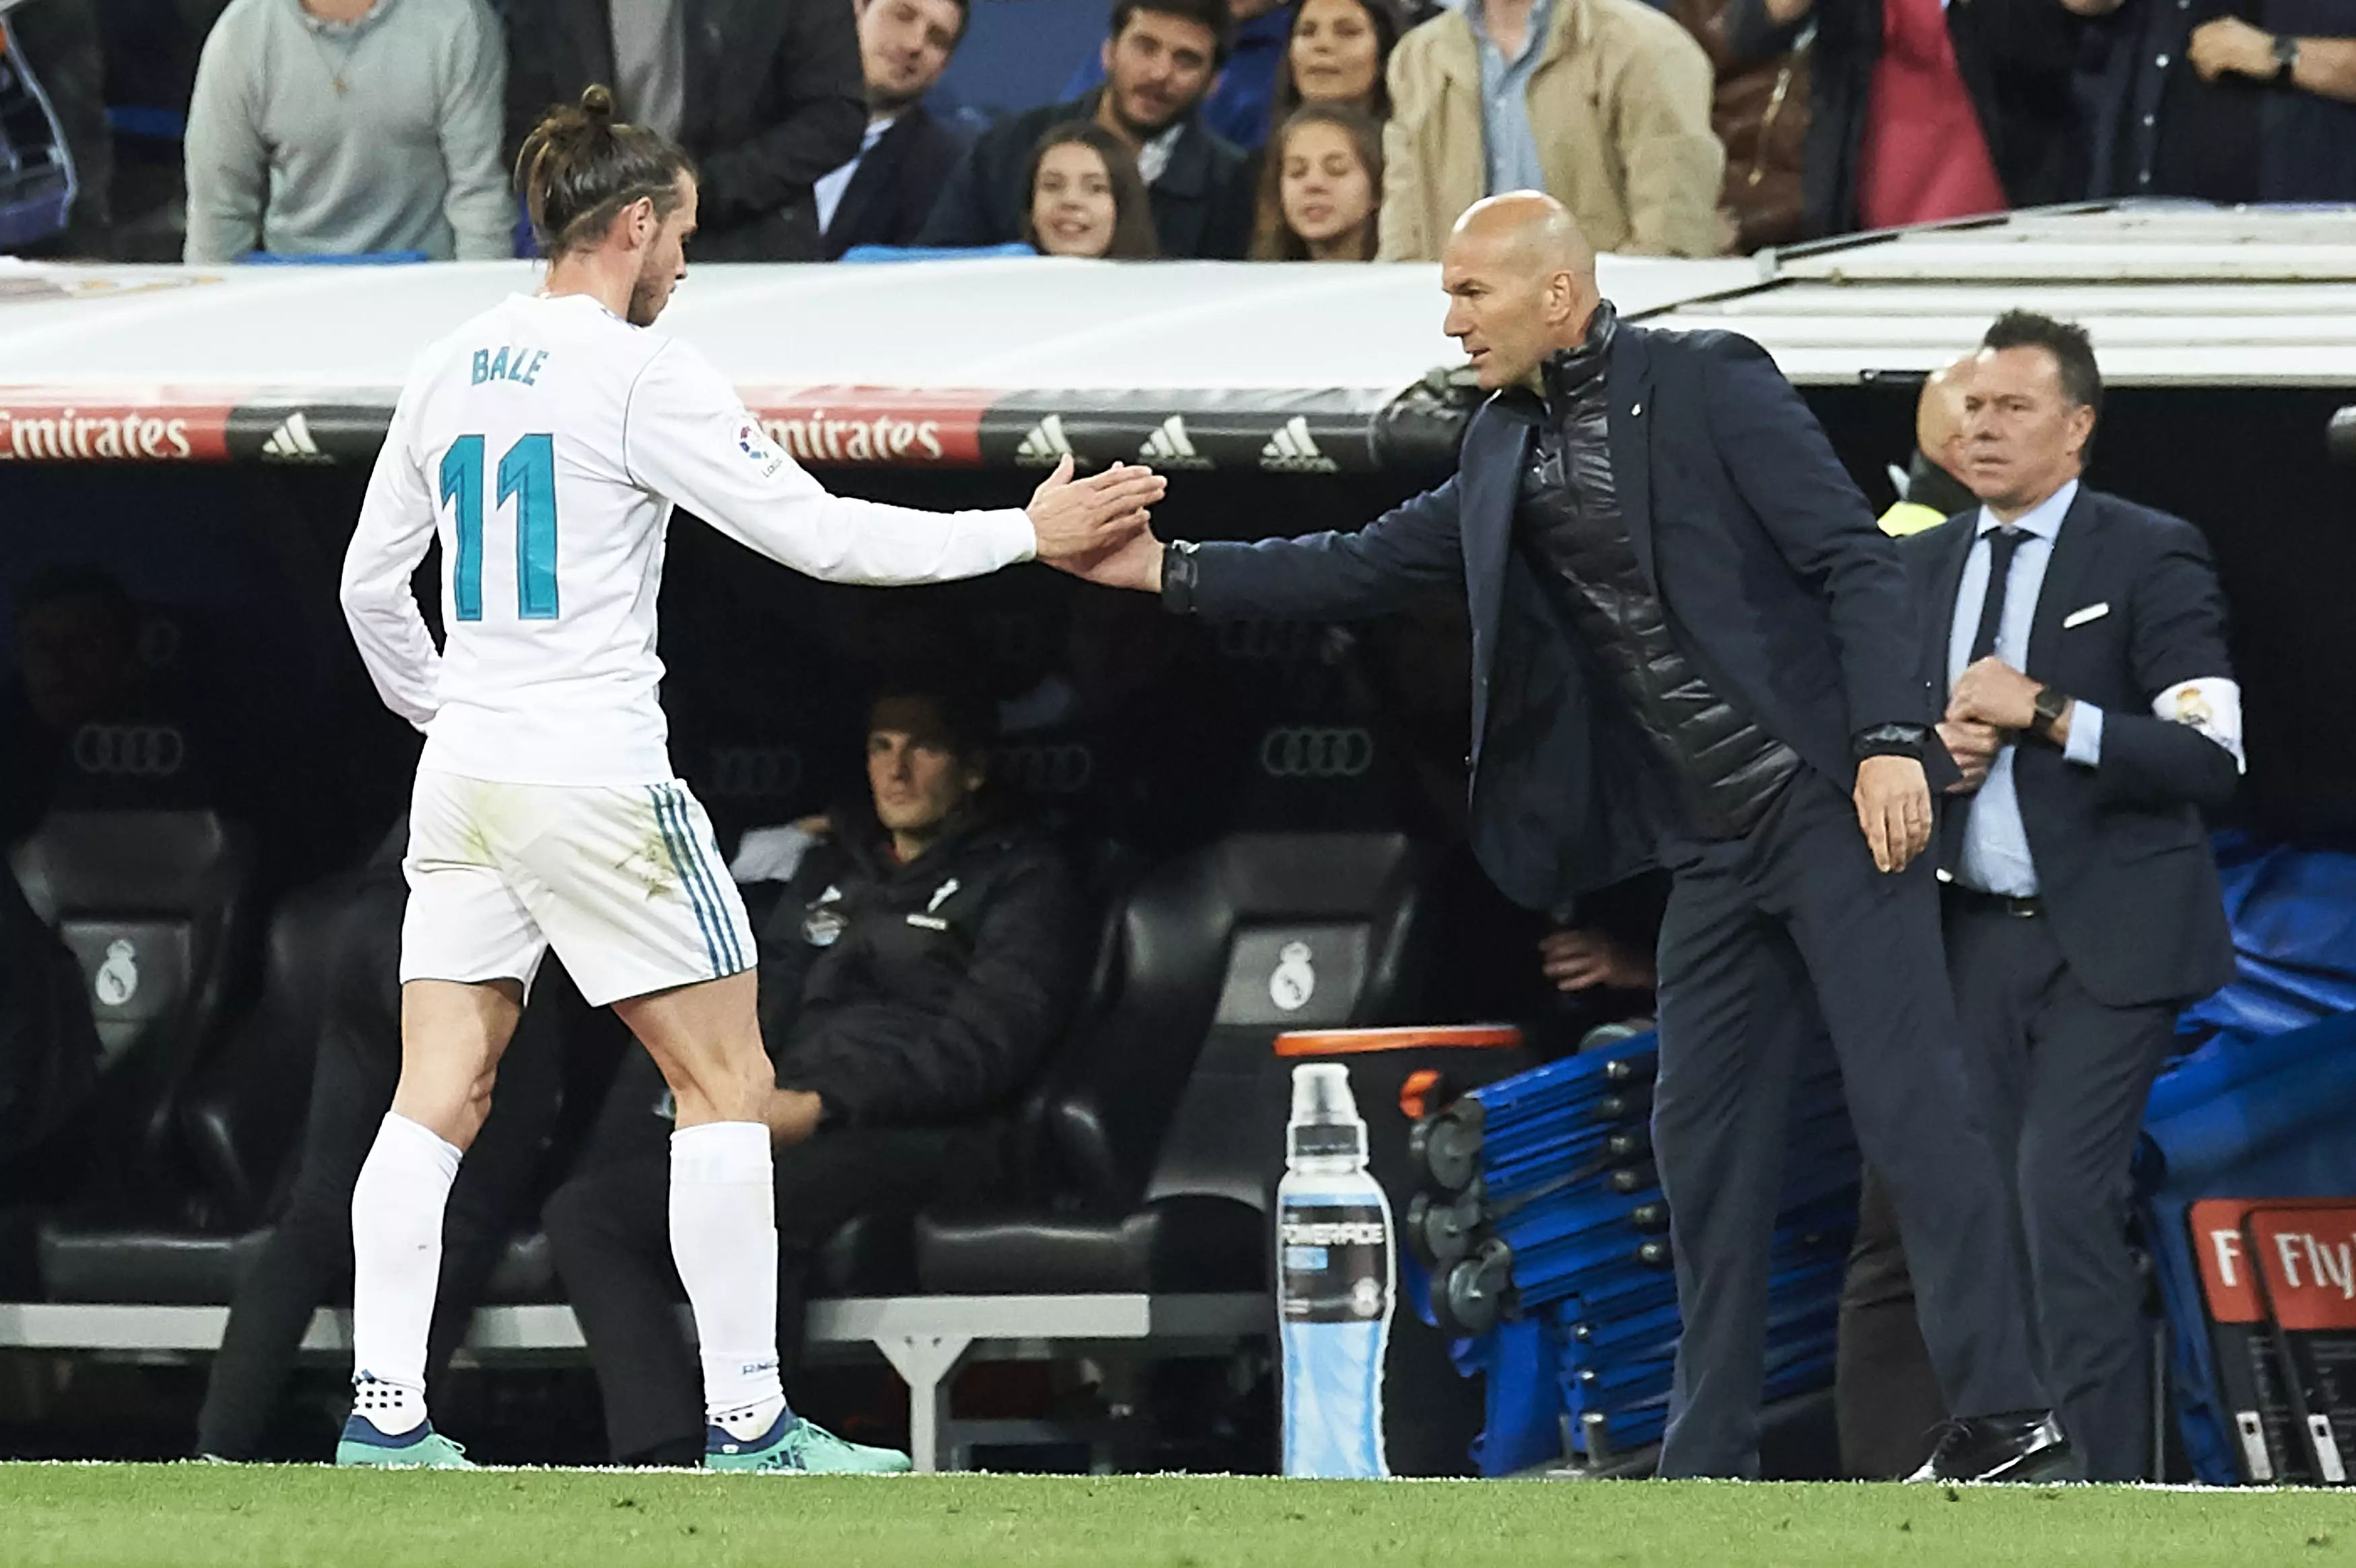 No loved loss between Zidane and Bale. Image: PA Images